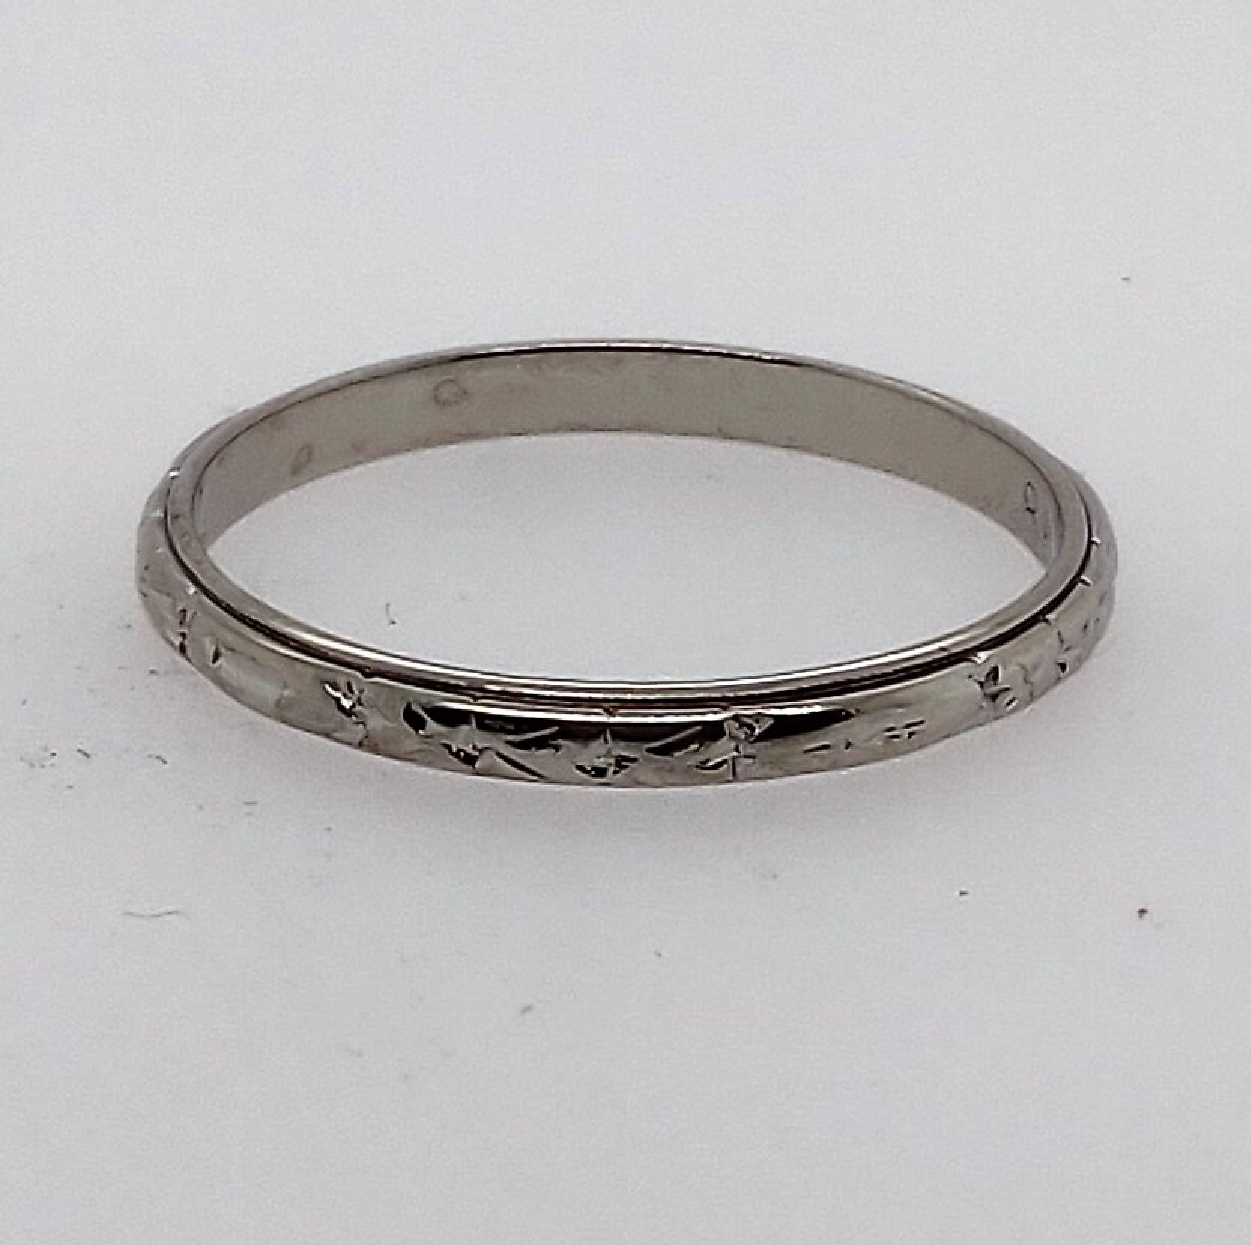 Antique 18k white gold etched wedding band. Size 8.75.